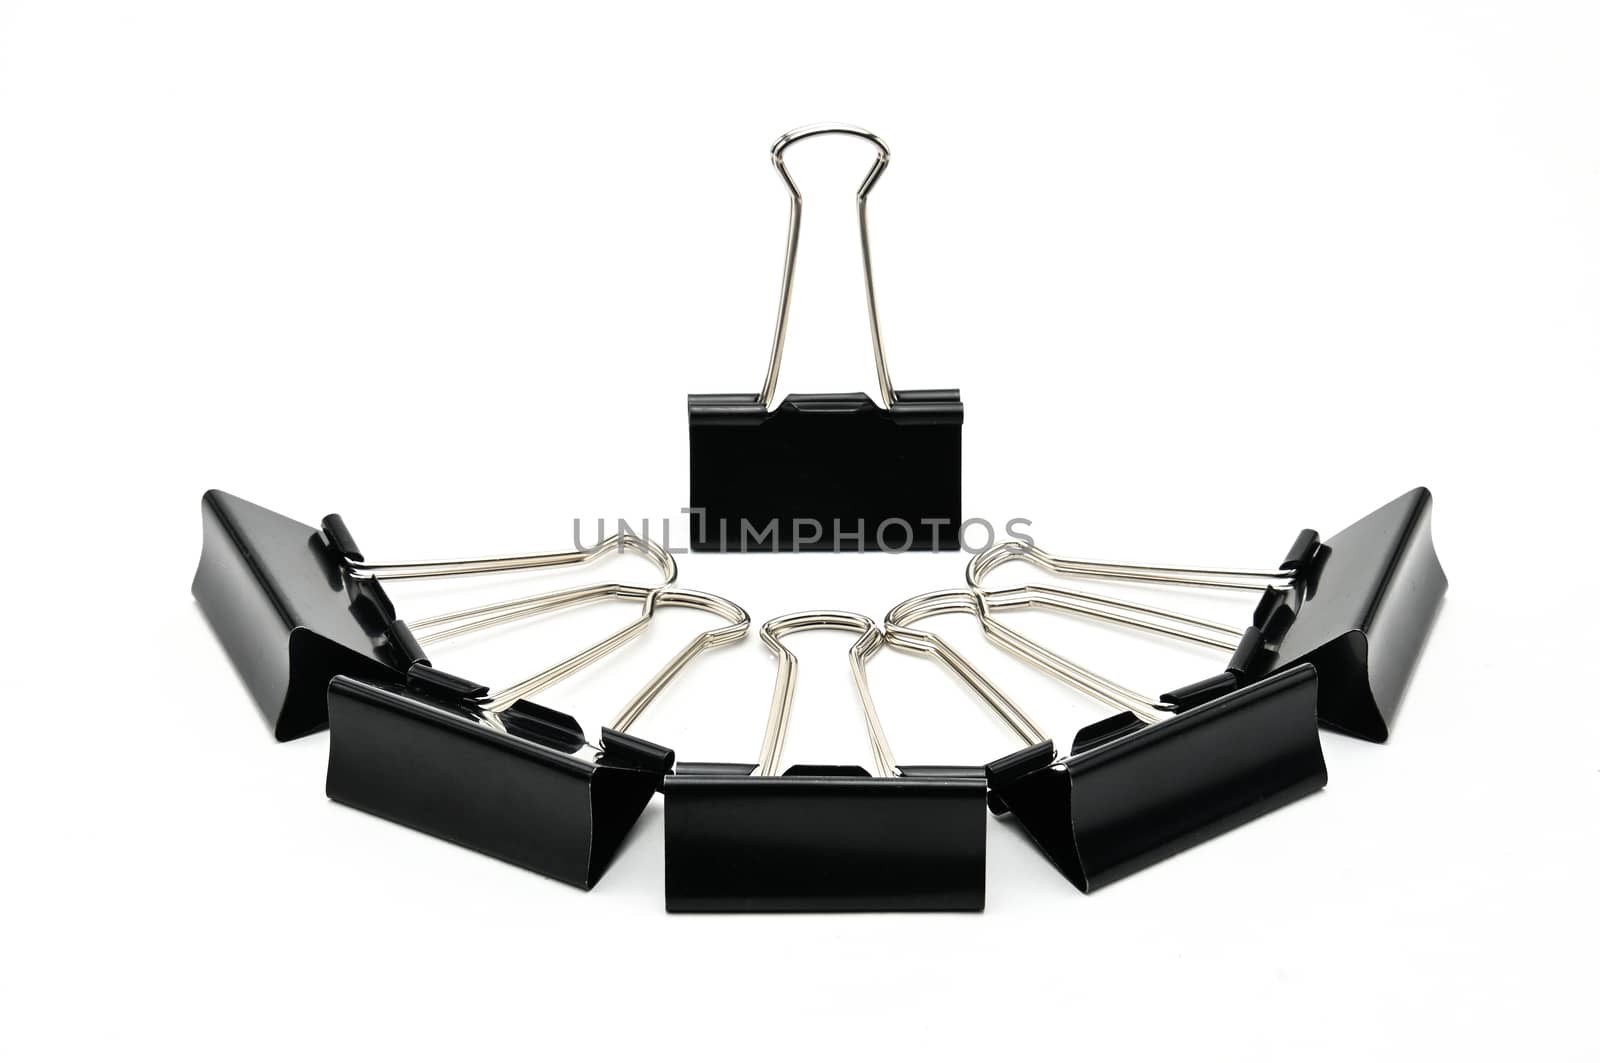 Binder clips paper clamp on an isolated background by moviephoto